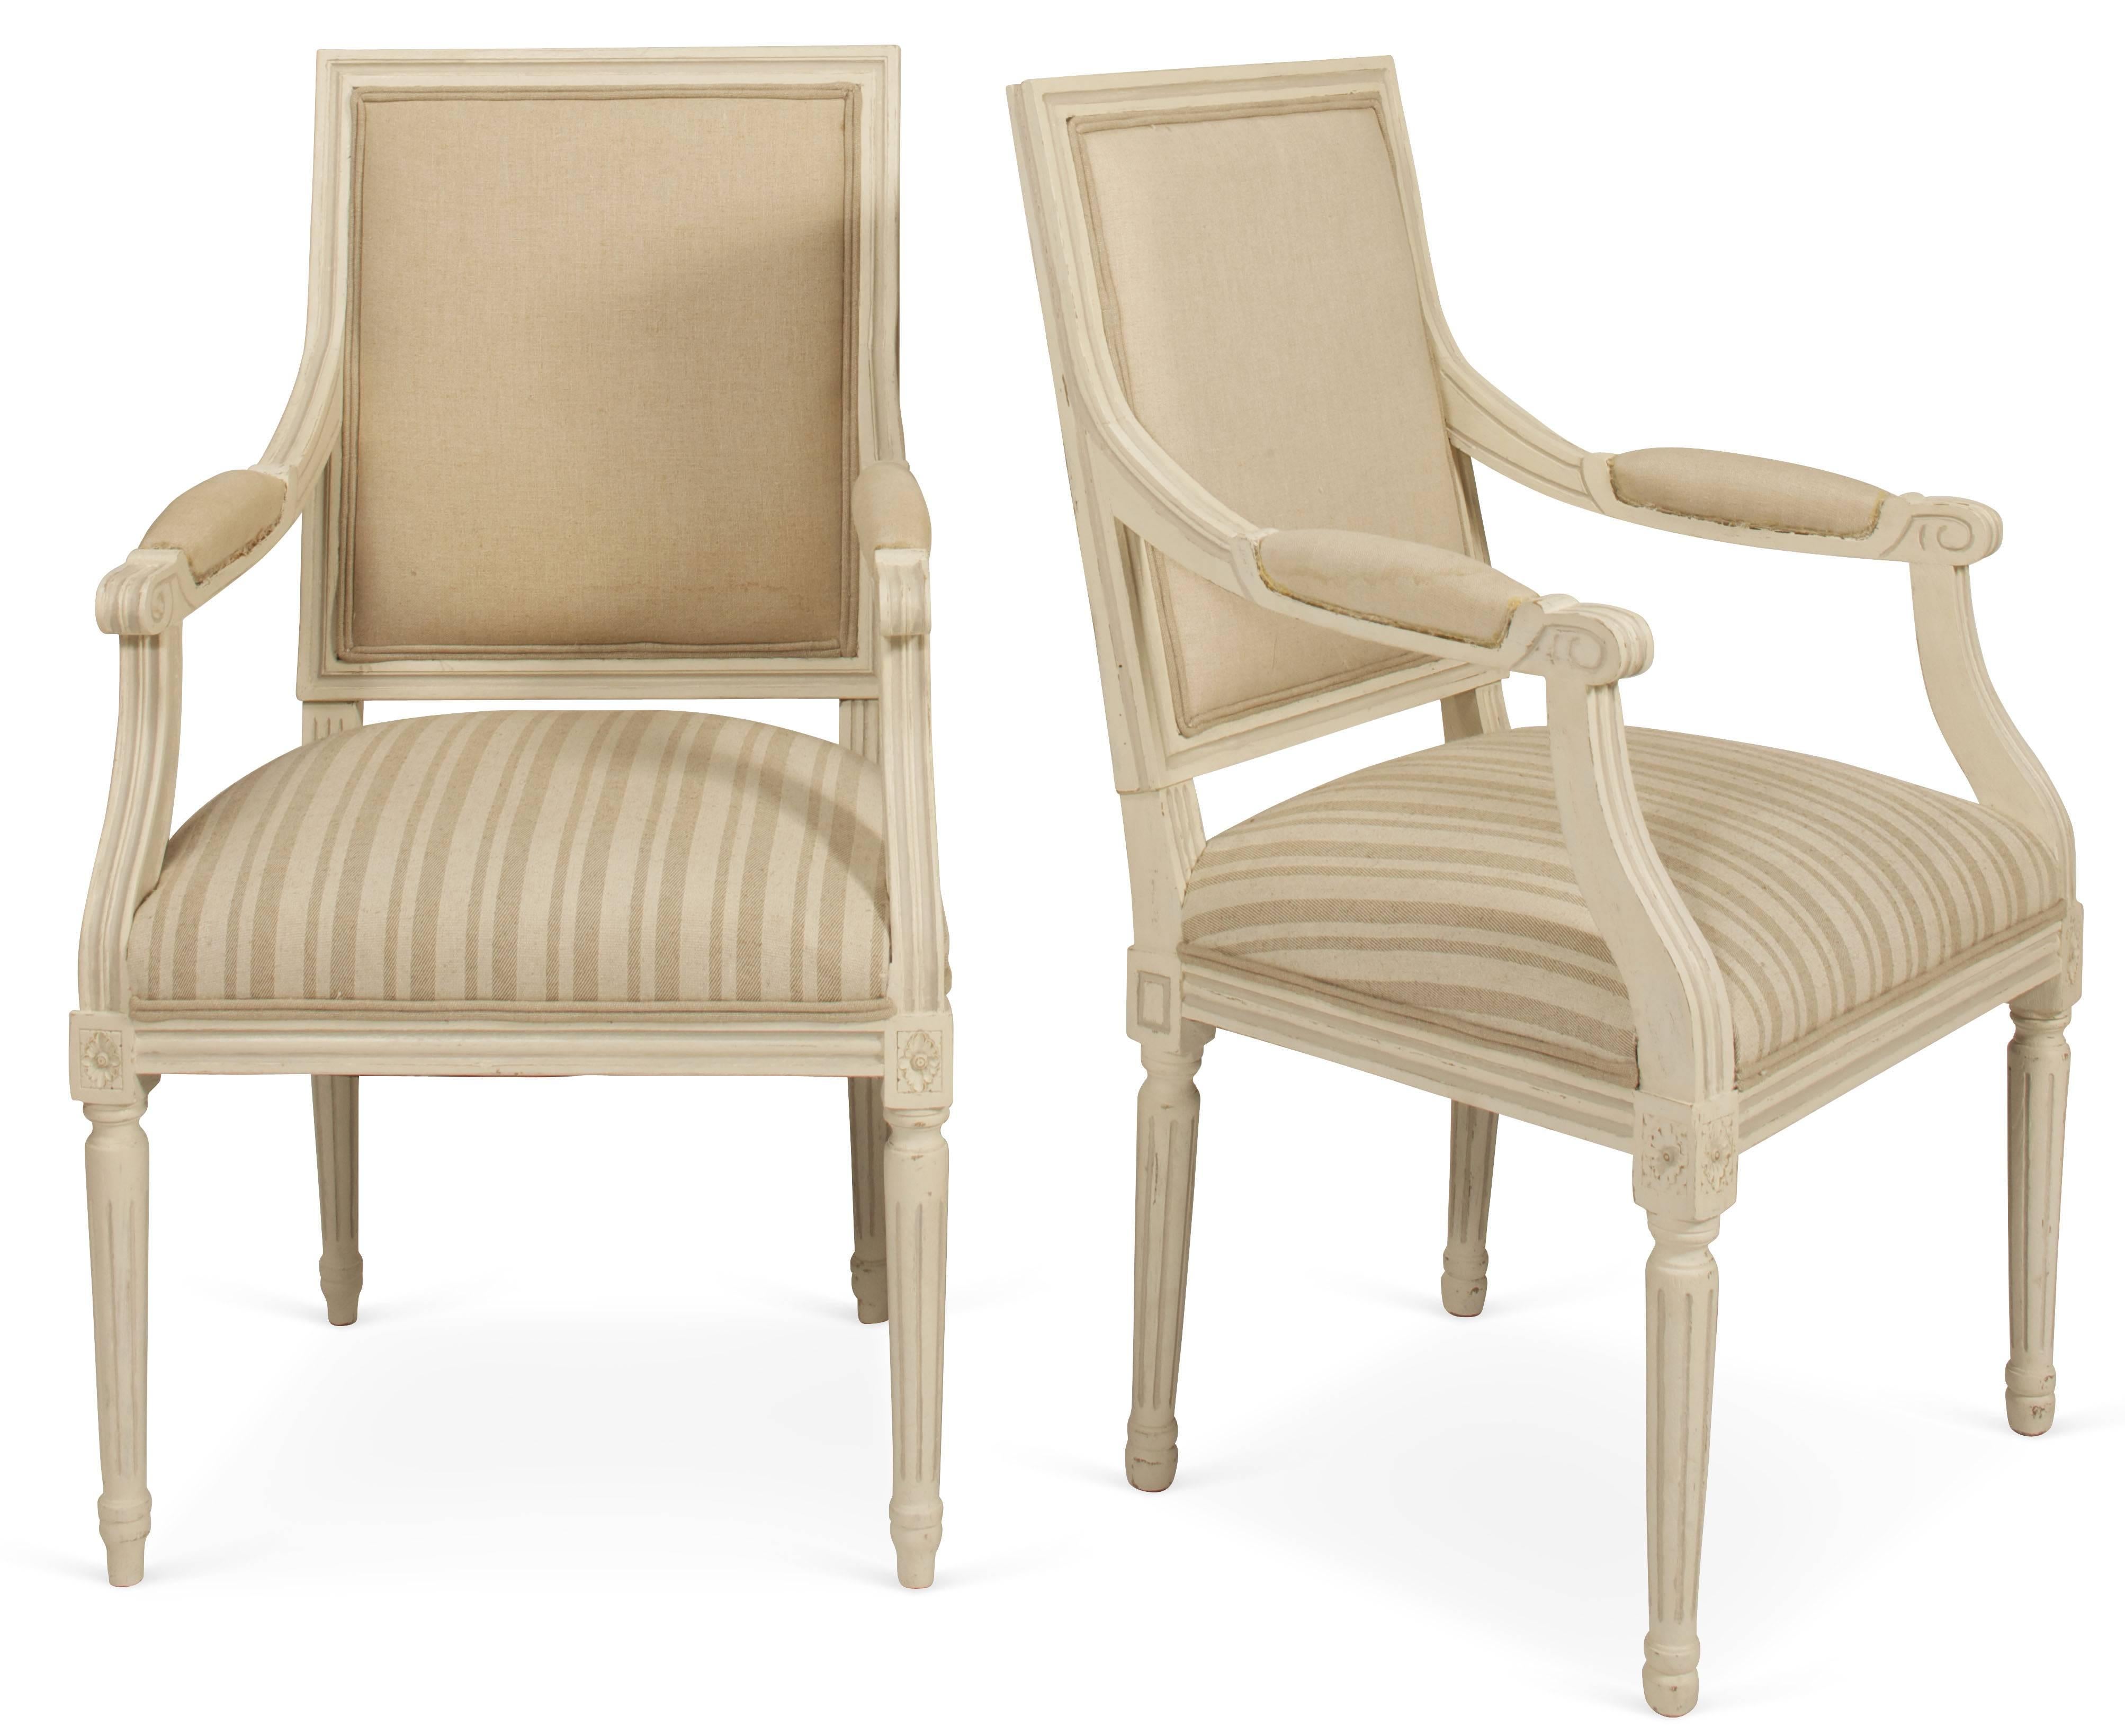 Upholstered in beige linen on the backs and arms and in striped linen on the seats, these chairs have frames painted in two shades of French cream. The chairs are perfect for dining room chairs, office desk chairs or occasional chairs. Lends